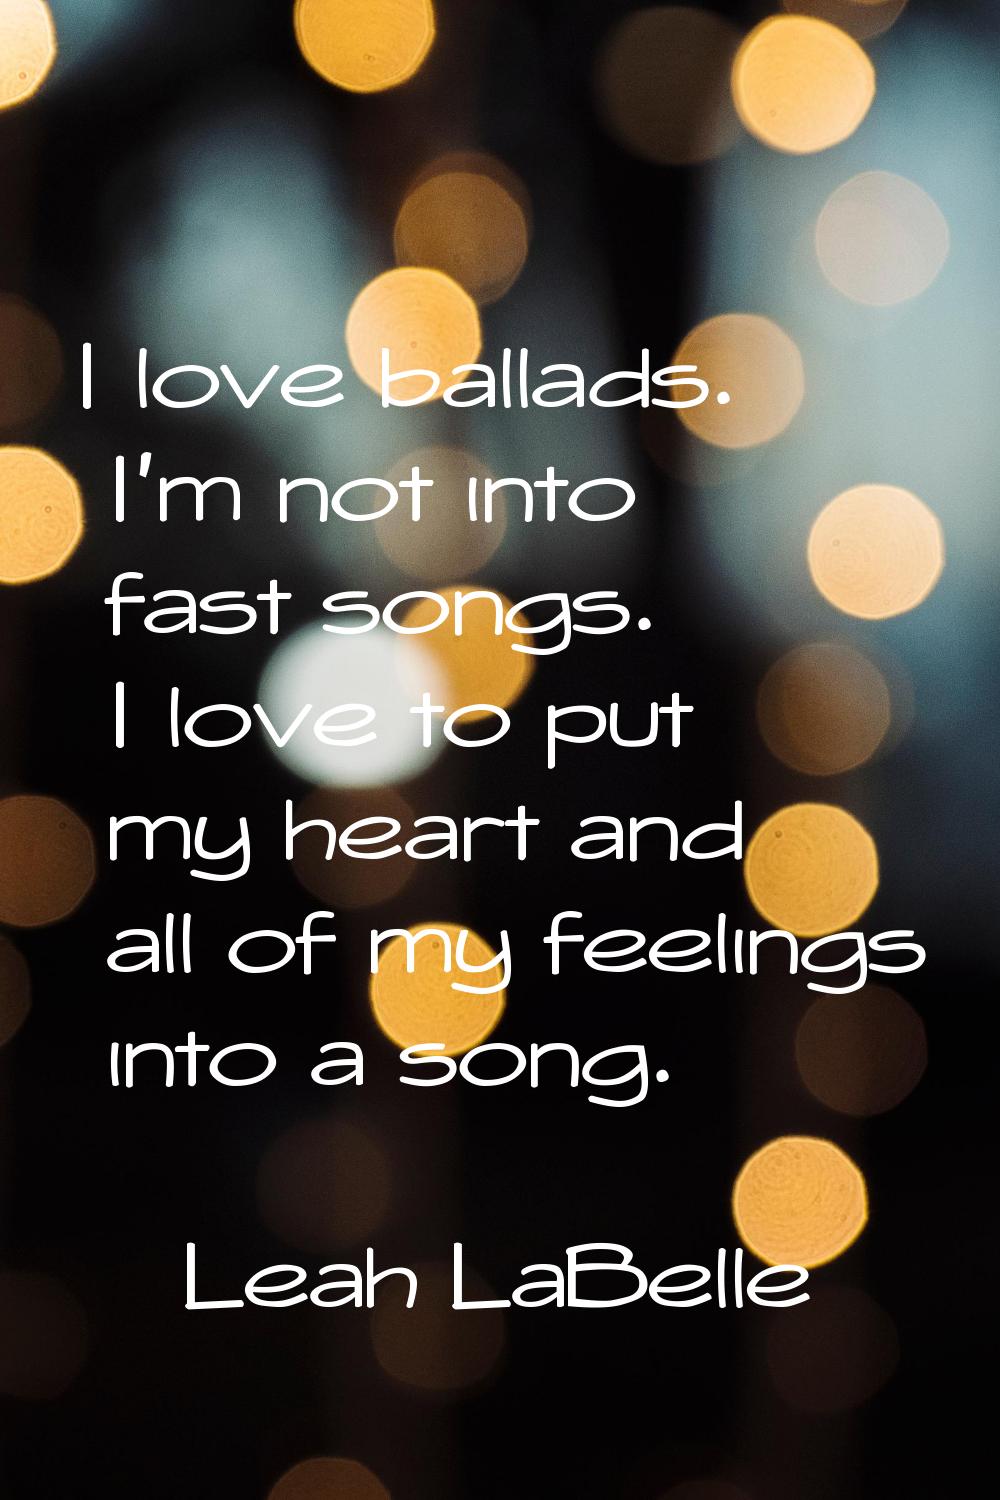 I love ballads. I'm not into fast songs. I love to put my heart and all of my feelings into a song.